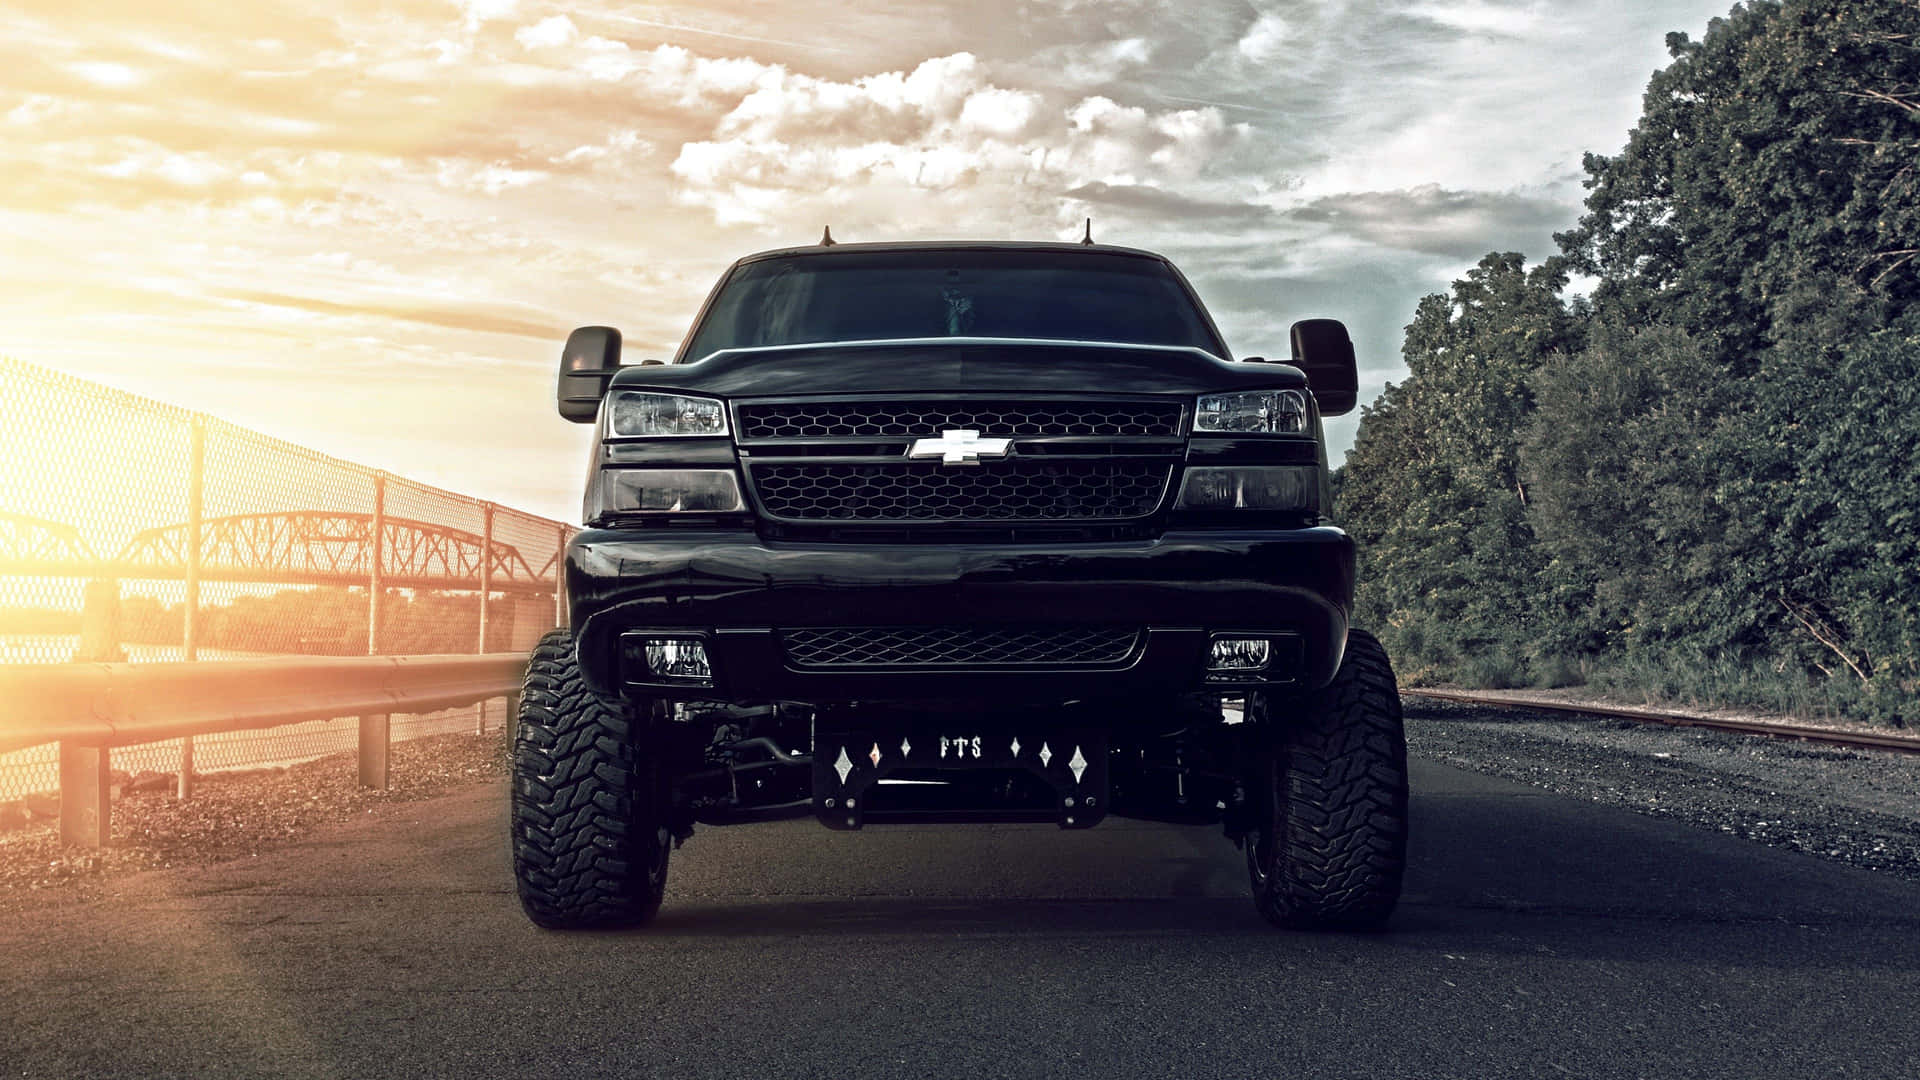 Black Lifted Truck Full Front View Wallpaper